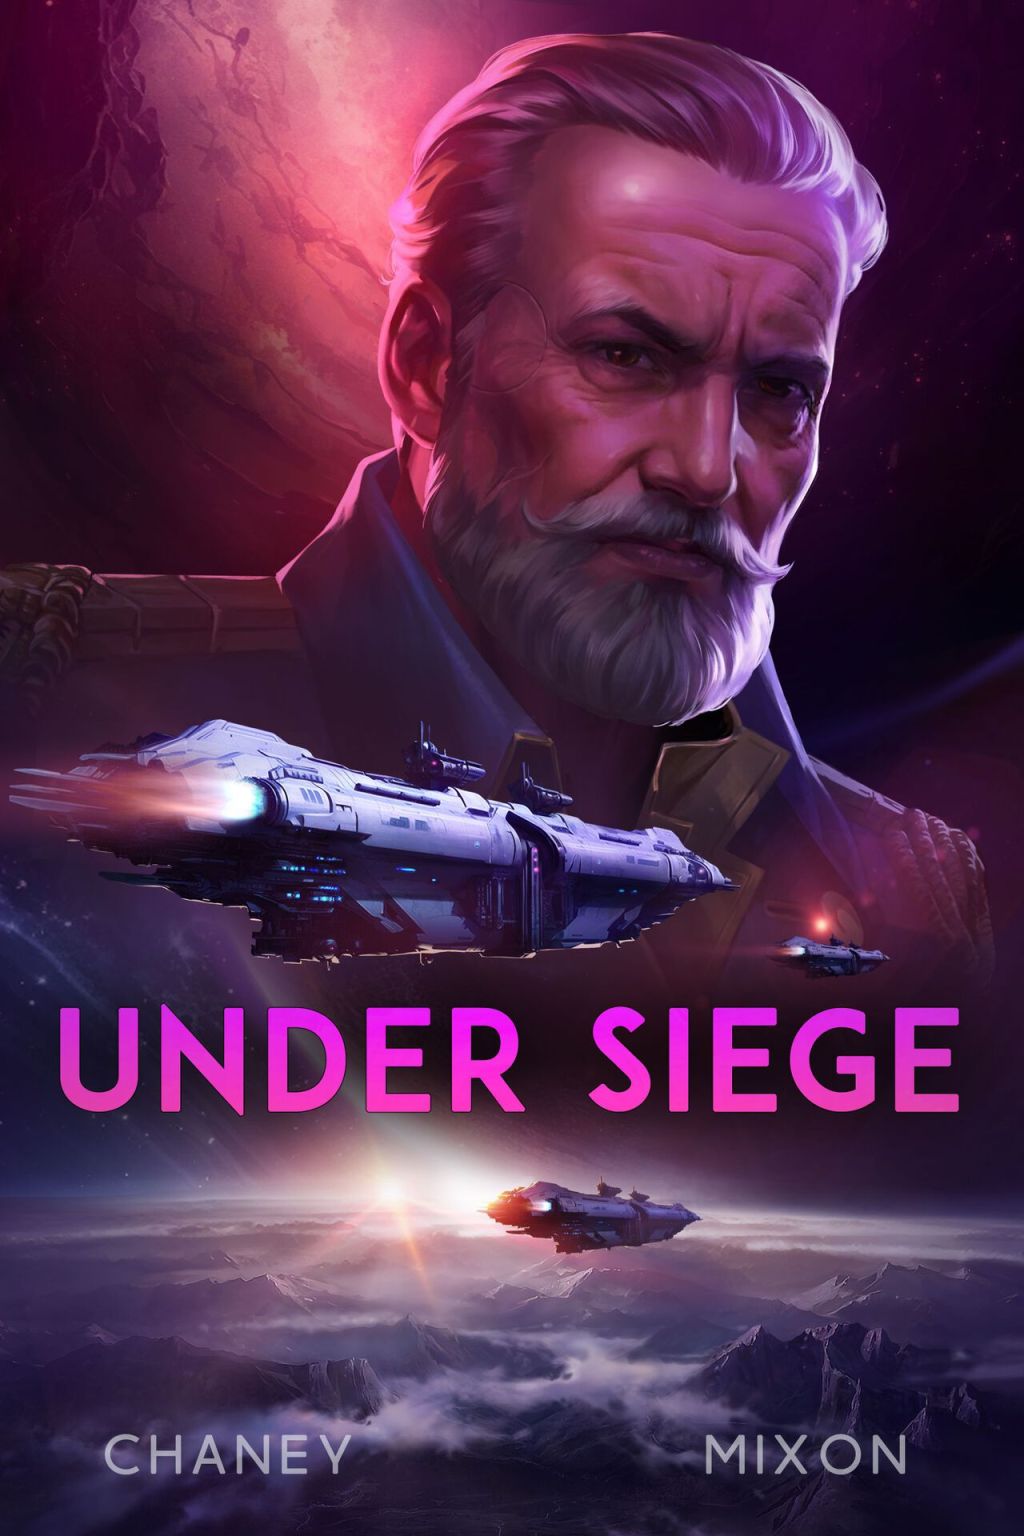 Under Siege – A bit meh compared to the other books.